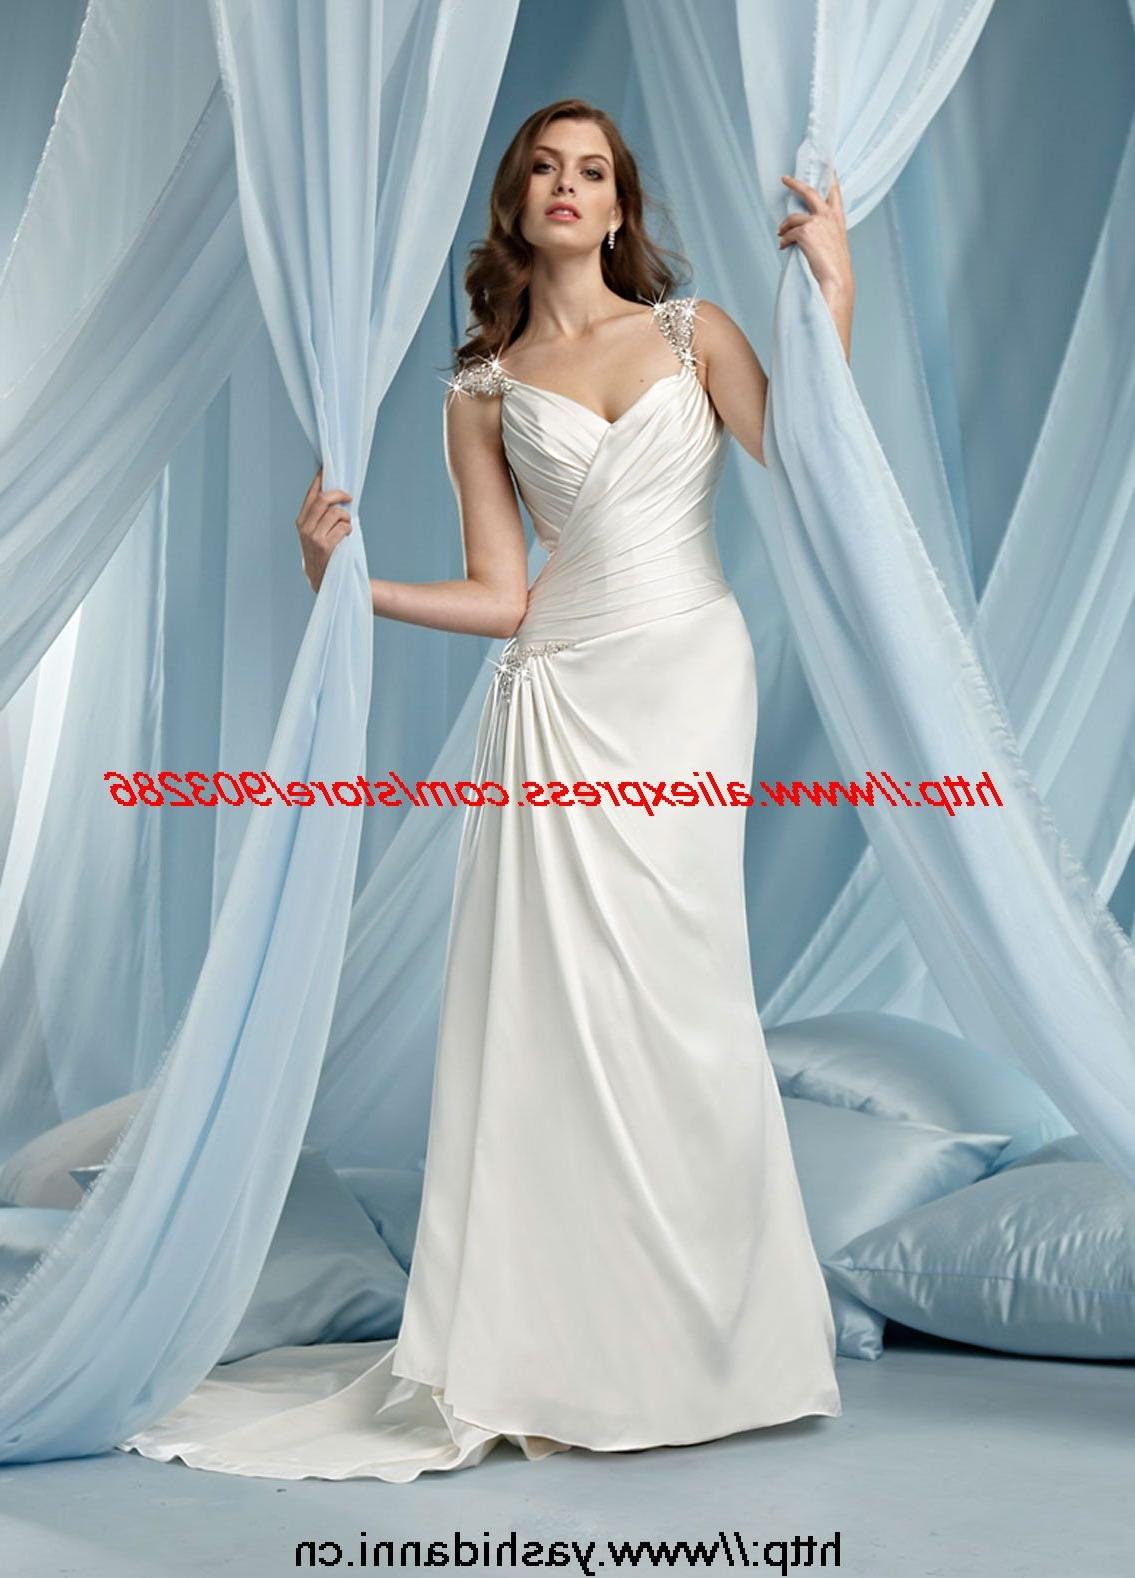 We are a professional maunfacturer of wedding dress and evening dress .